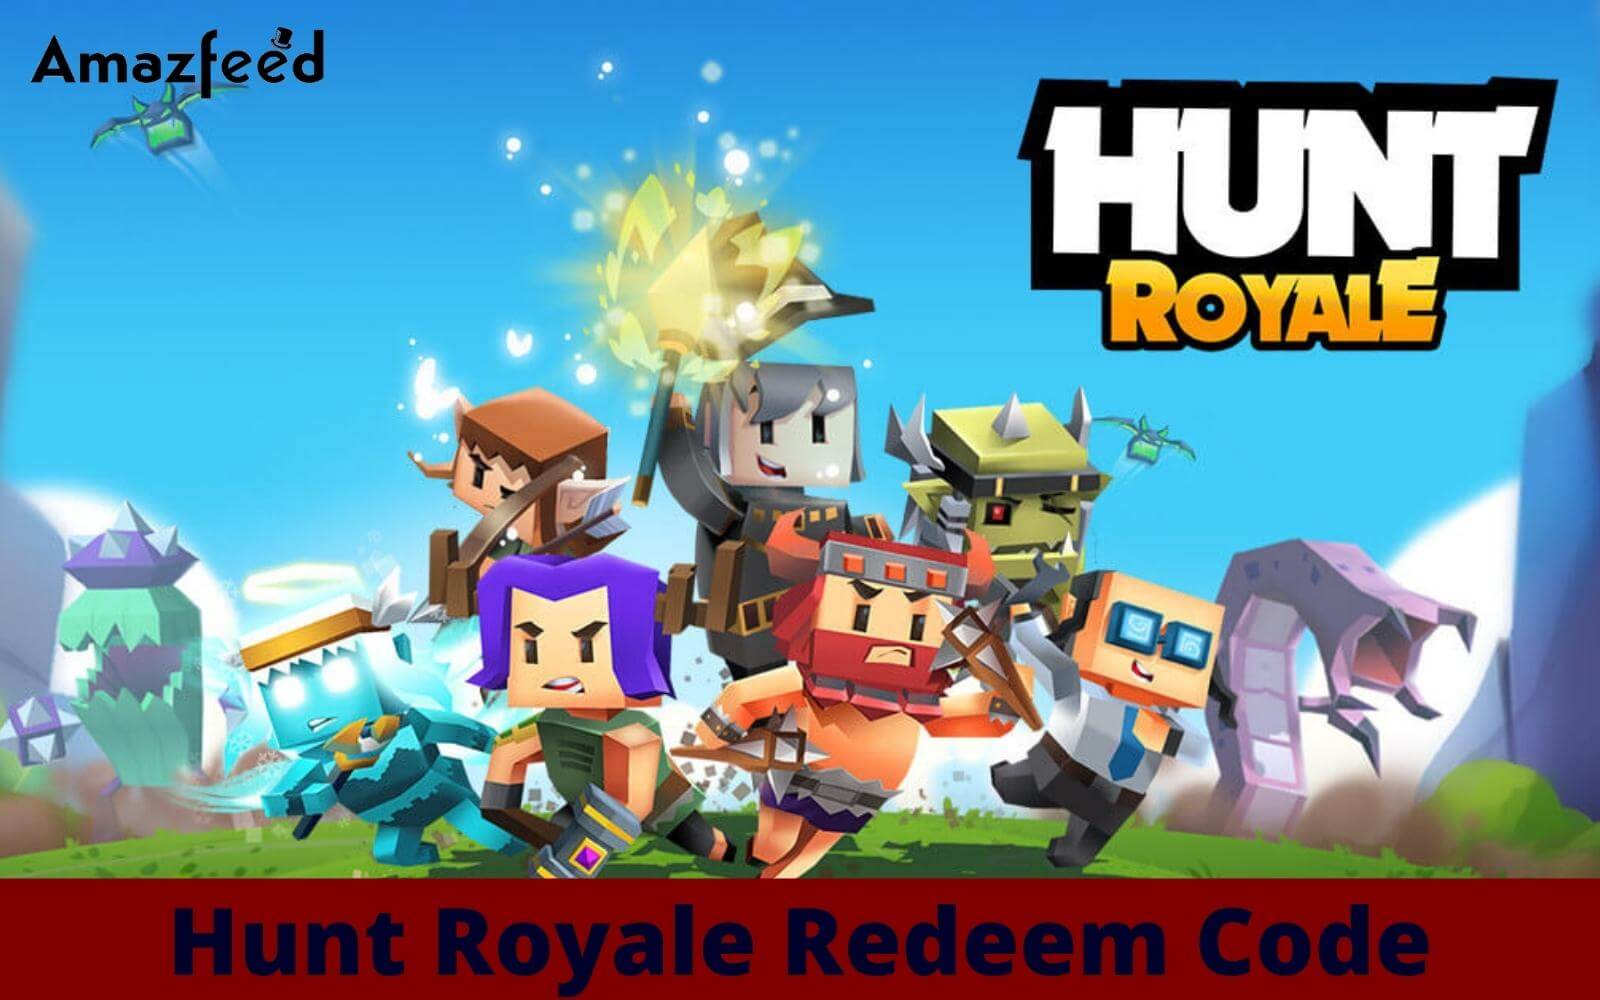 Hunt Royale Redeem Code | Check How To Redeem Hunt Royale Redeem Code 2022